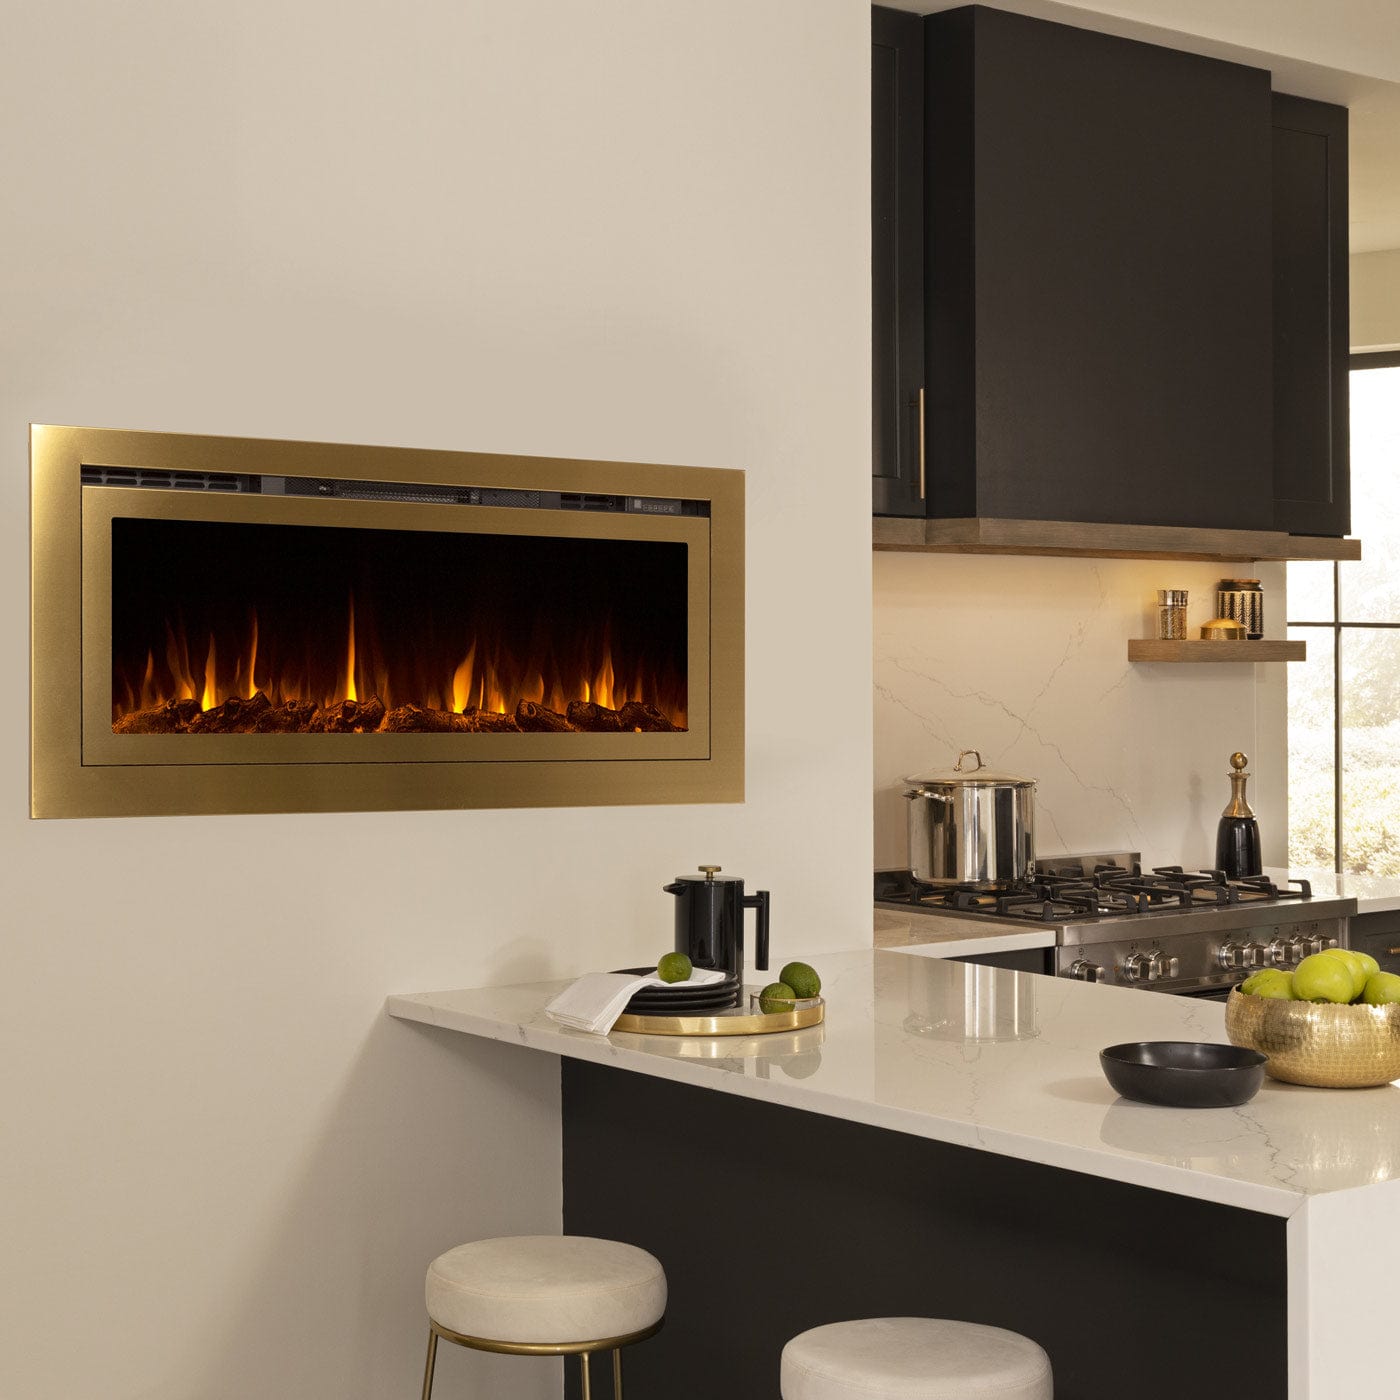 Sideline Deluxe Gold 50" 86275 Recessed Smart Electric Fireplace